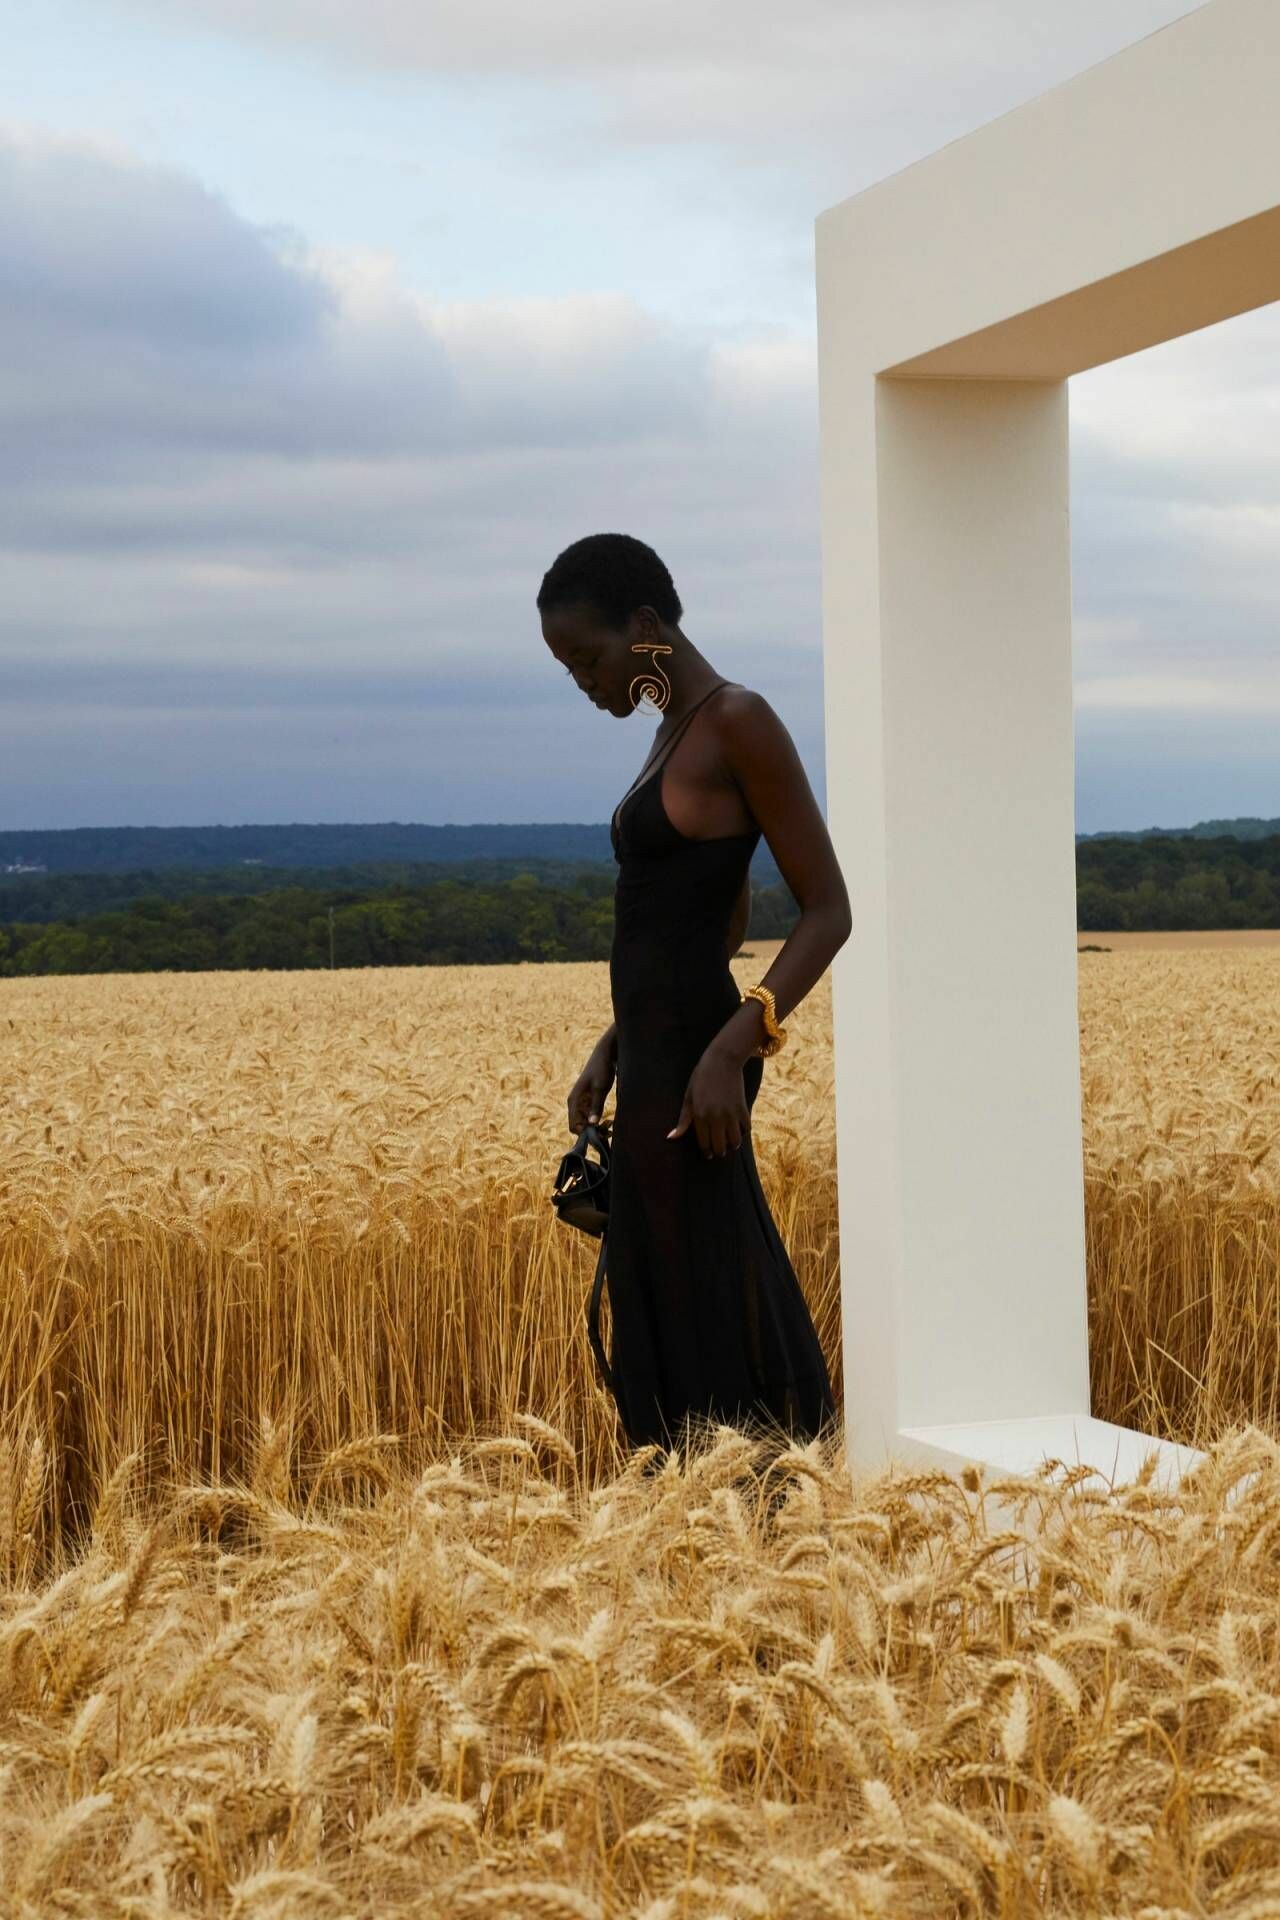 Jacquemus: Spring/Summer 2021 collection, Fashion show in a wheat field. 1280x1920 HD Wallpaper.